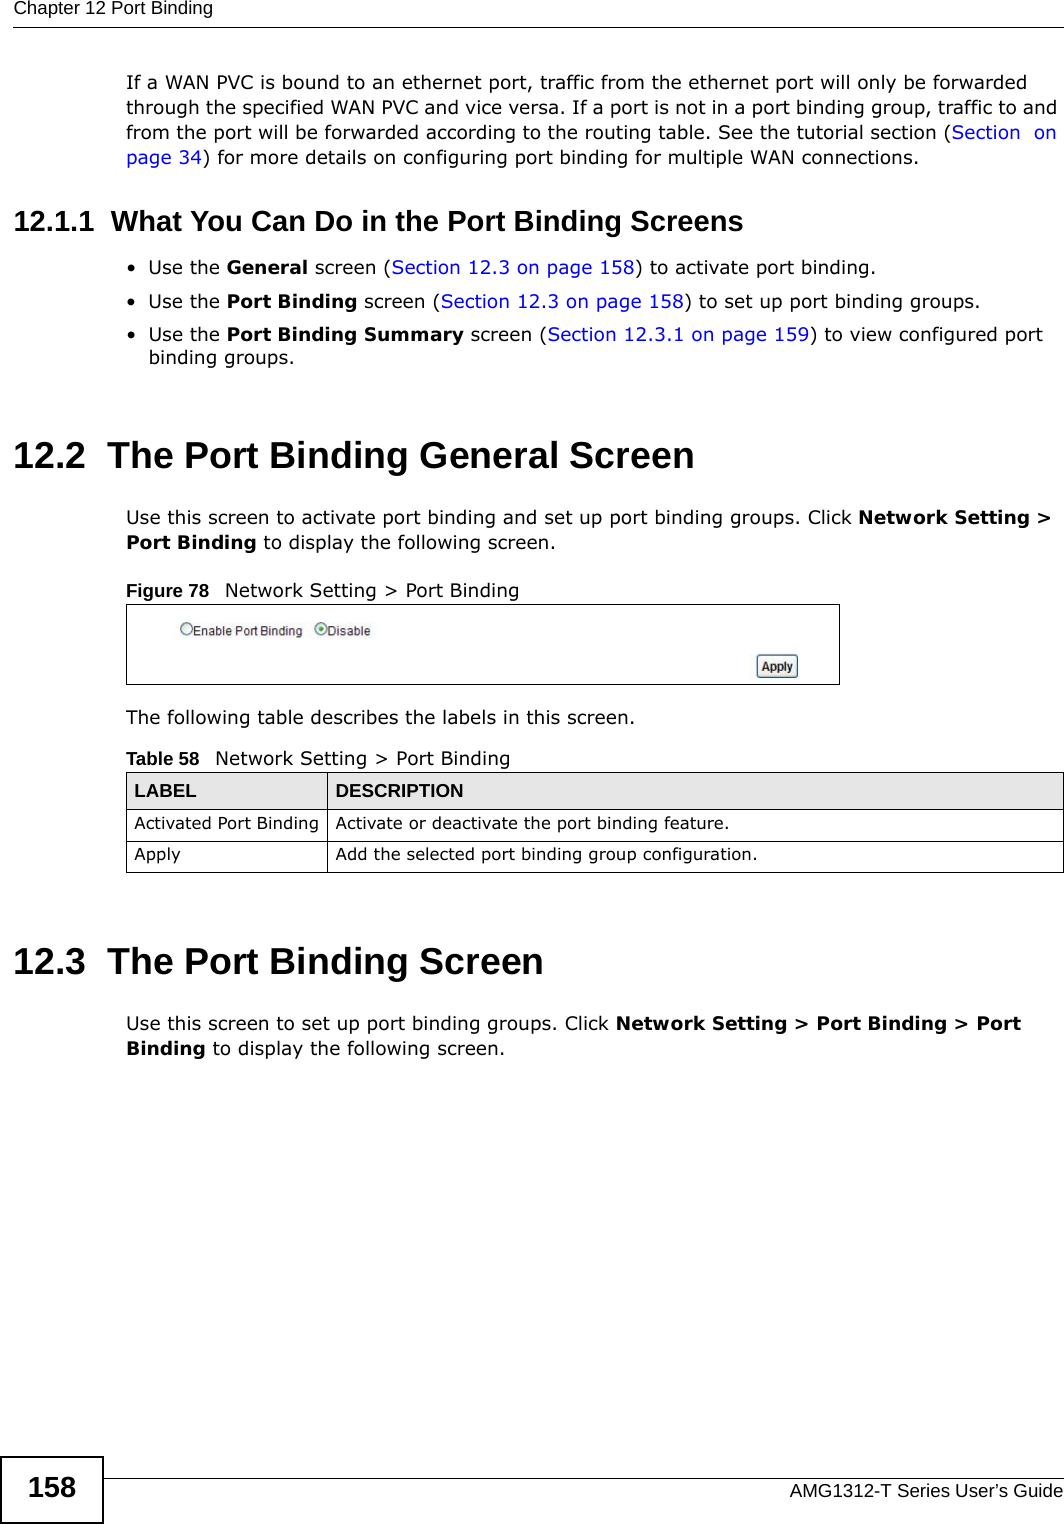 Chapter 12 Port BindingAMG1312-T Series User’s Guide158If a WAN PVC is bound to an ethernet port, traffic from the ethernet port will only be forwarded through the specified WAN PVC and vice versa. If a port is not in a port binding group, traffic to and from the port will be forwarded according to the routing table. See the tutorial section (Section  on page 34) for more details on configuring port binding for multiple WAN connections.12.1.1  What You Can Do in the Port Binding Screens•Use the General screen (Section 12.3 on page 158) to activate port binding.•Use the Port Binding screen (Section 12.3 on page 158) to set up port binding groups.•Use the Port Binding Summary screen (Section 12.3.1 on page 159) to view configured port binding groups.12.2  The Port Binding General ScreenUse this screen to activate port binding and set up port binding groups. Click Network Setting &gt; Port Binding to display the following screen.Figure 78   Network Setting &gt; Port BindingThe following table describes the labels in this screen. 12.3  The Port Binding ScreenUse this screen to set up port binding groups. Click Network Setting &gt; Port Binding &gt; Port Binding to display the following screen.Table 58   Network Setting &gt; Port BindingLABEL DESCRIPTIONActivated Port Binding Activate or deactivate the port binding feature.Apply Add the selected port binding group configuration.